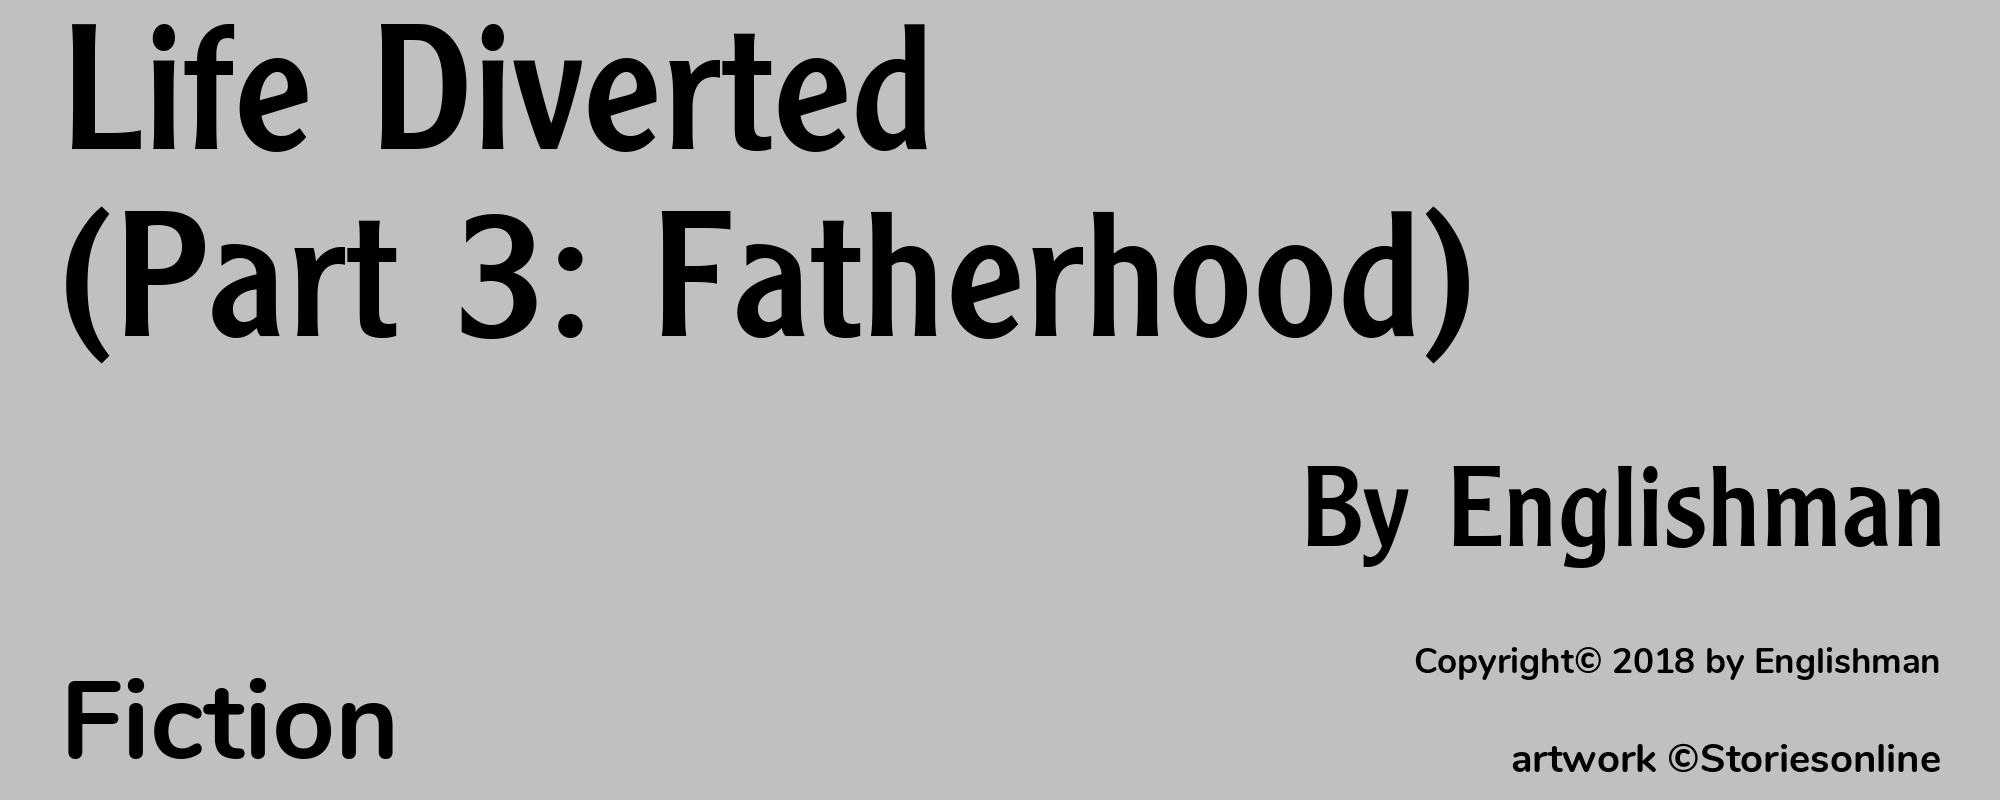 Life Diverted (Part 3: Fatherhood) - Cover